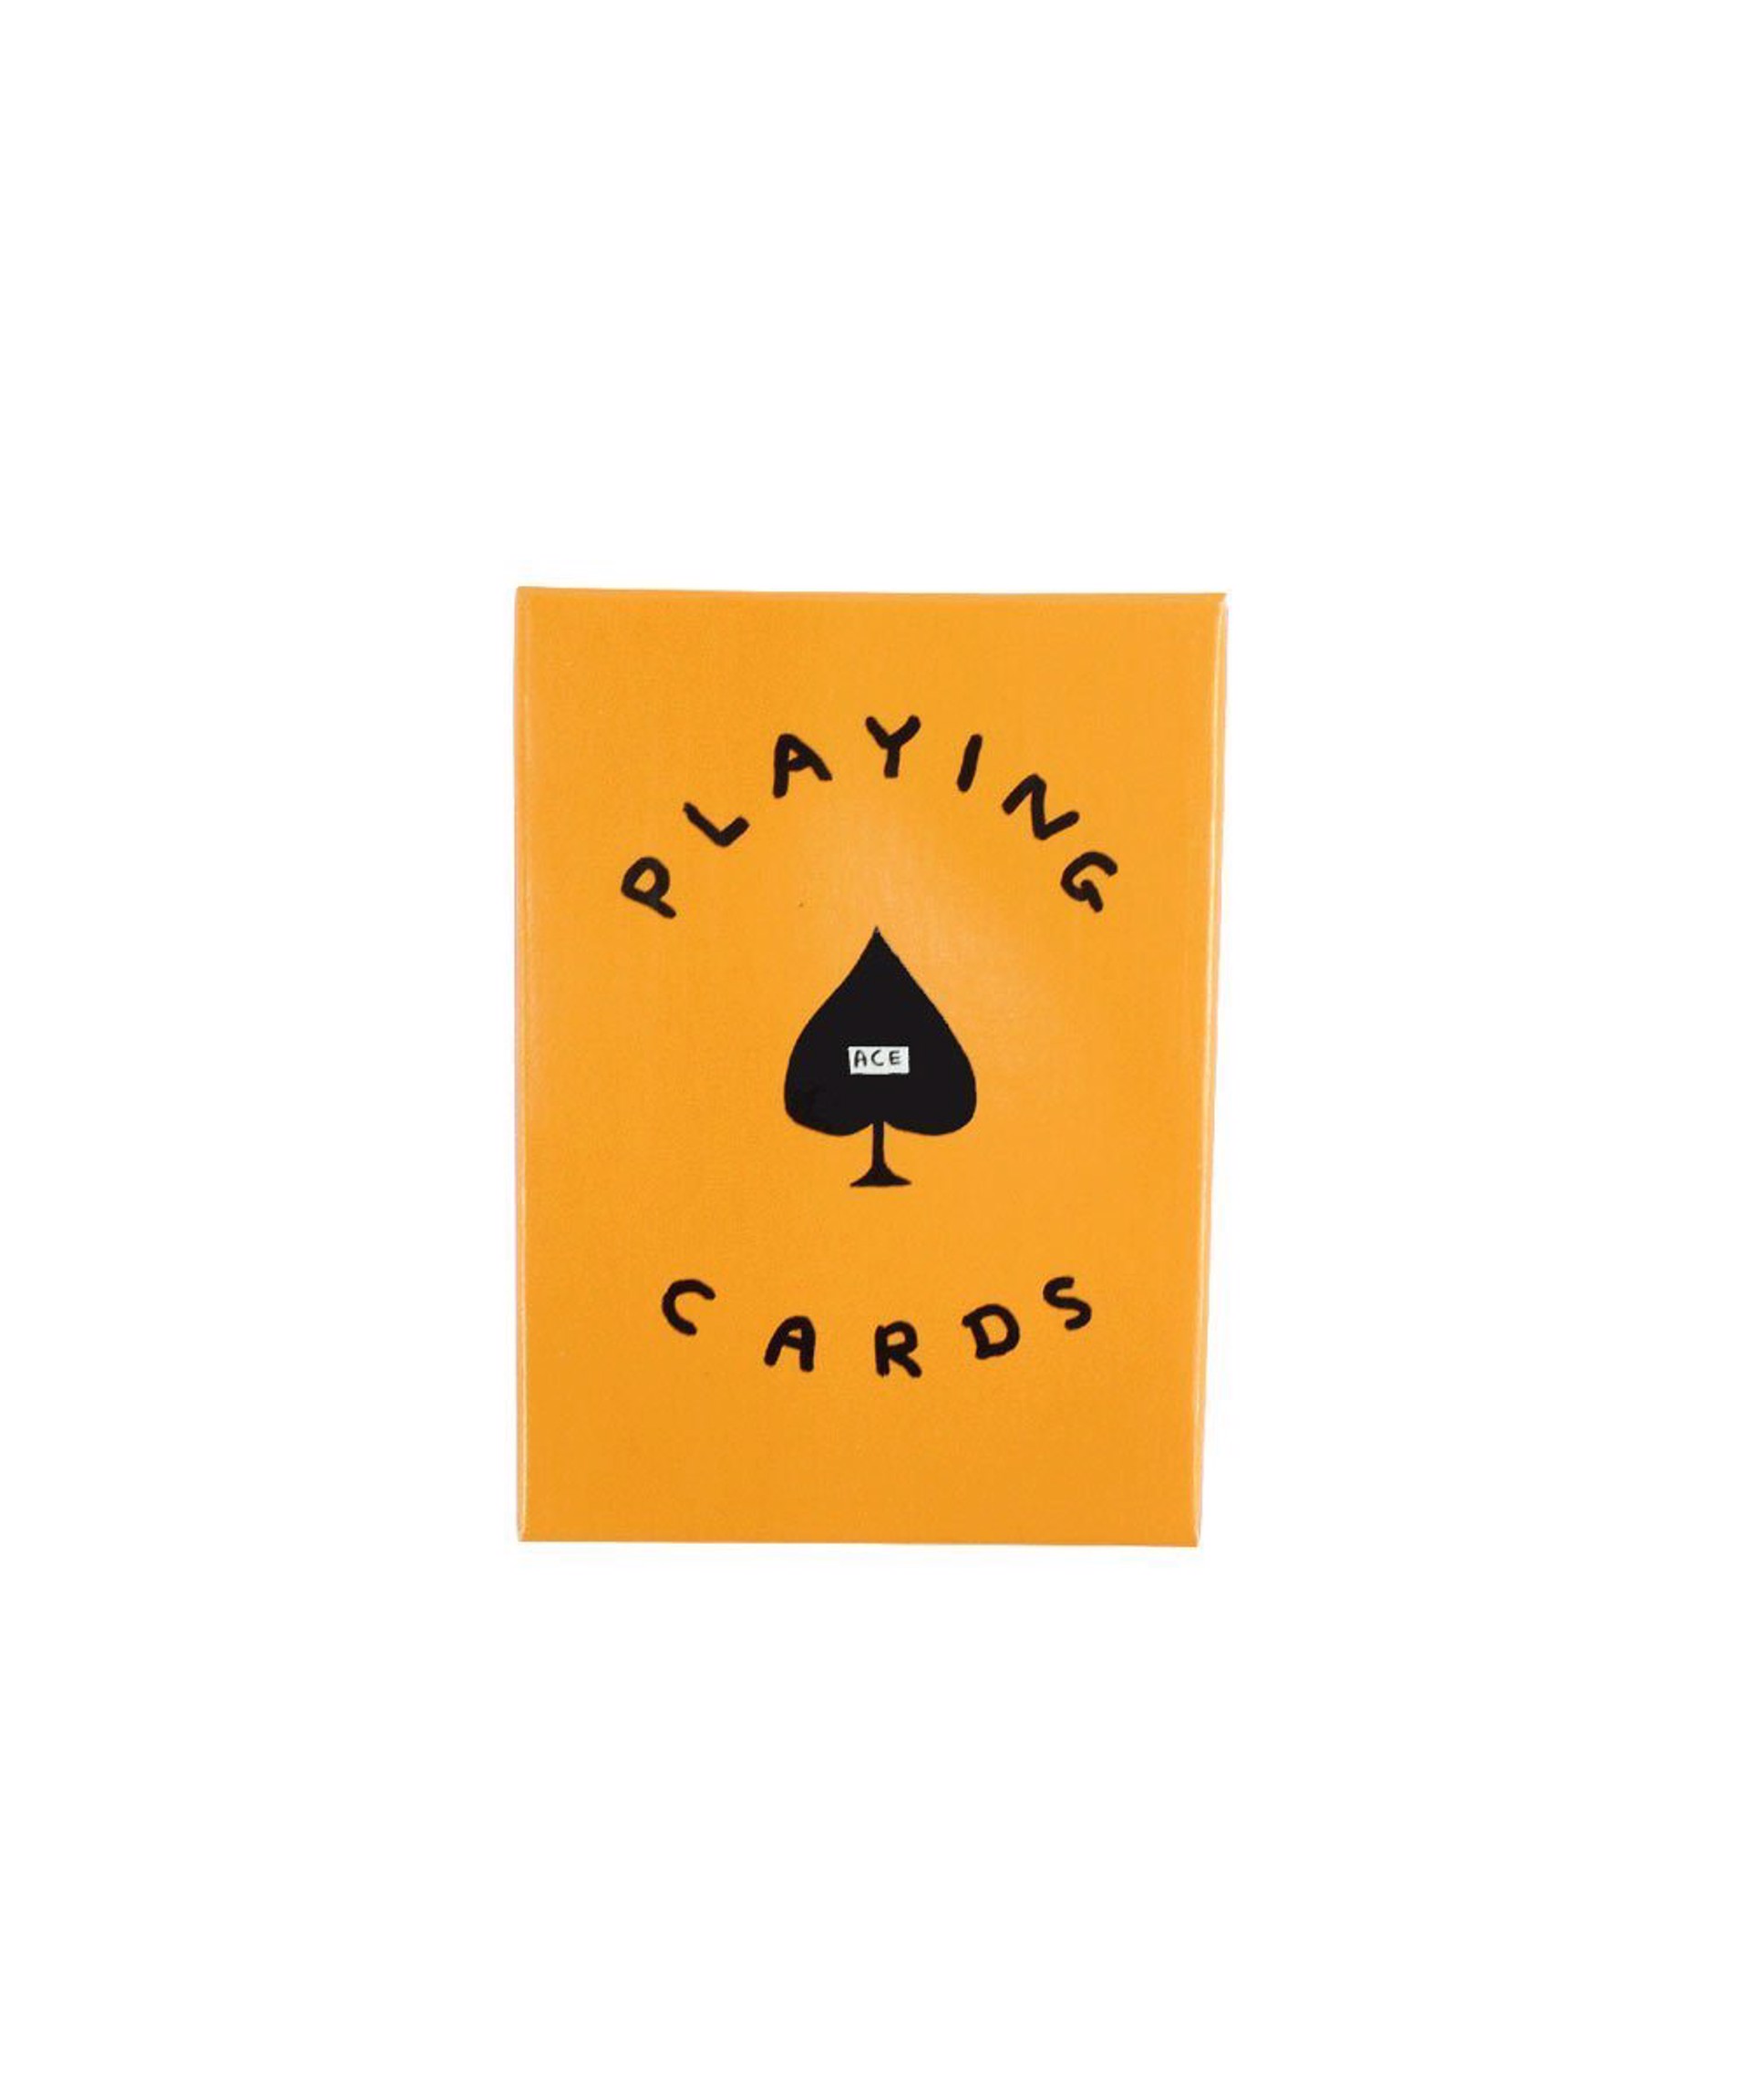 Playing Cards by David Shrigley